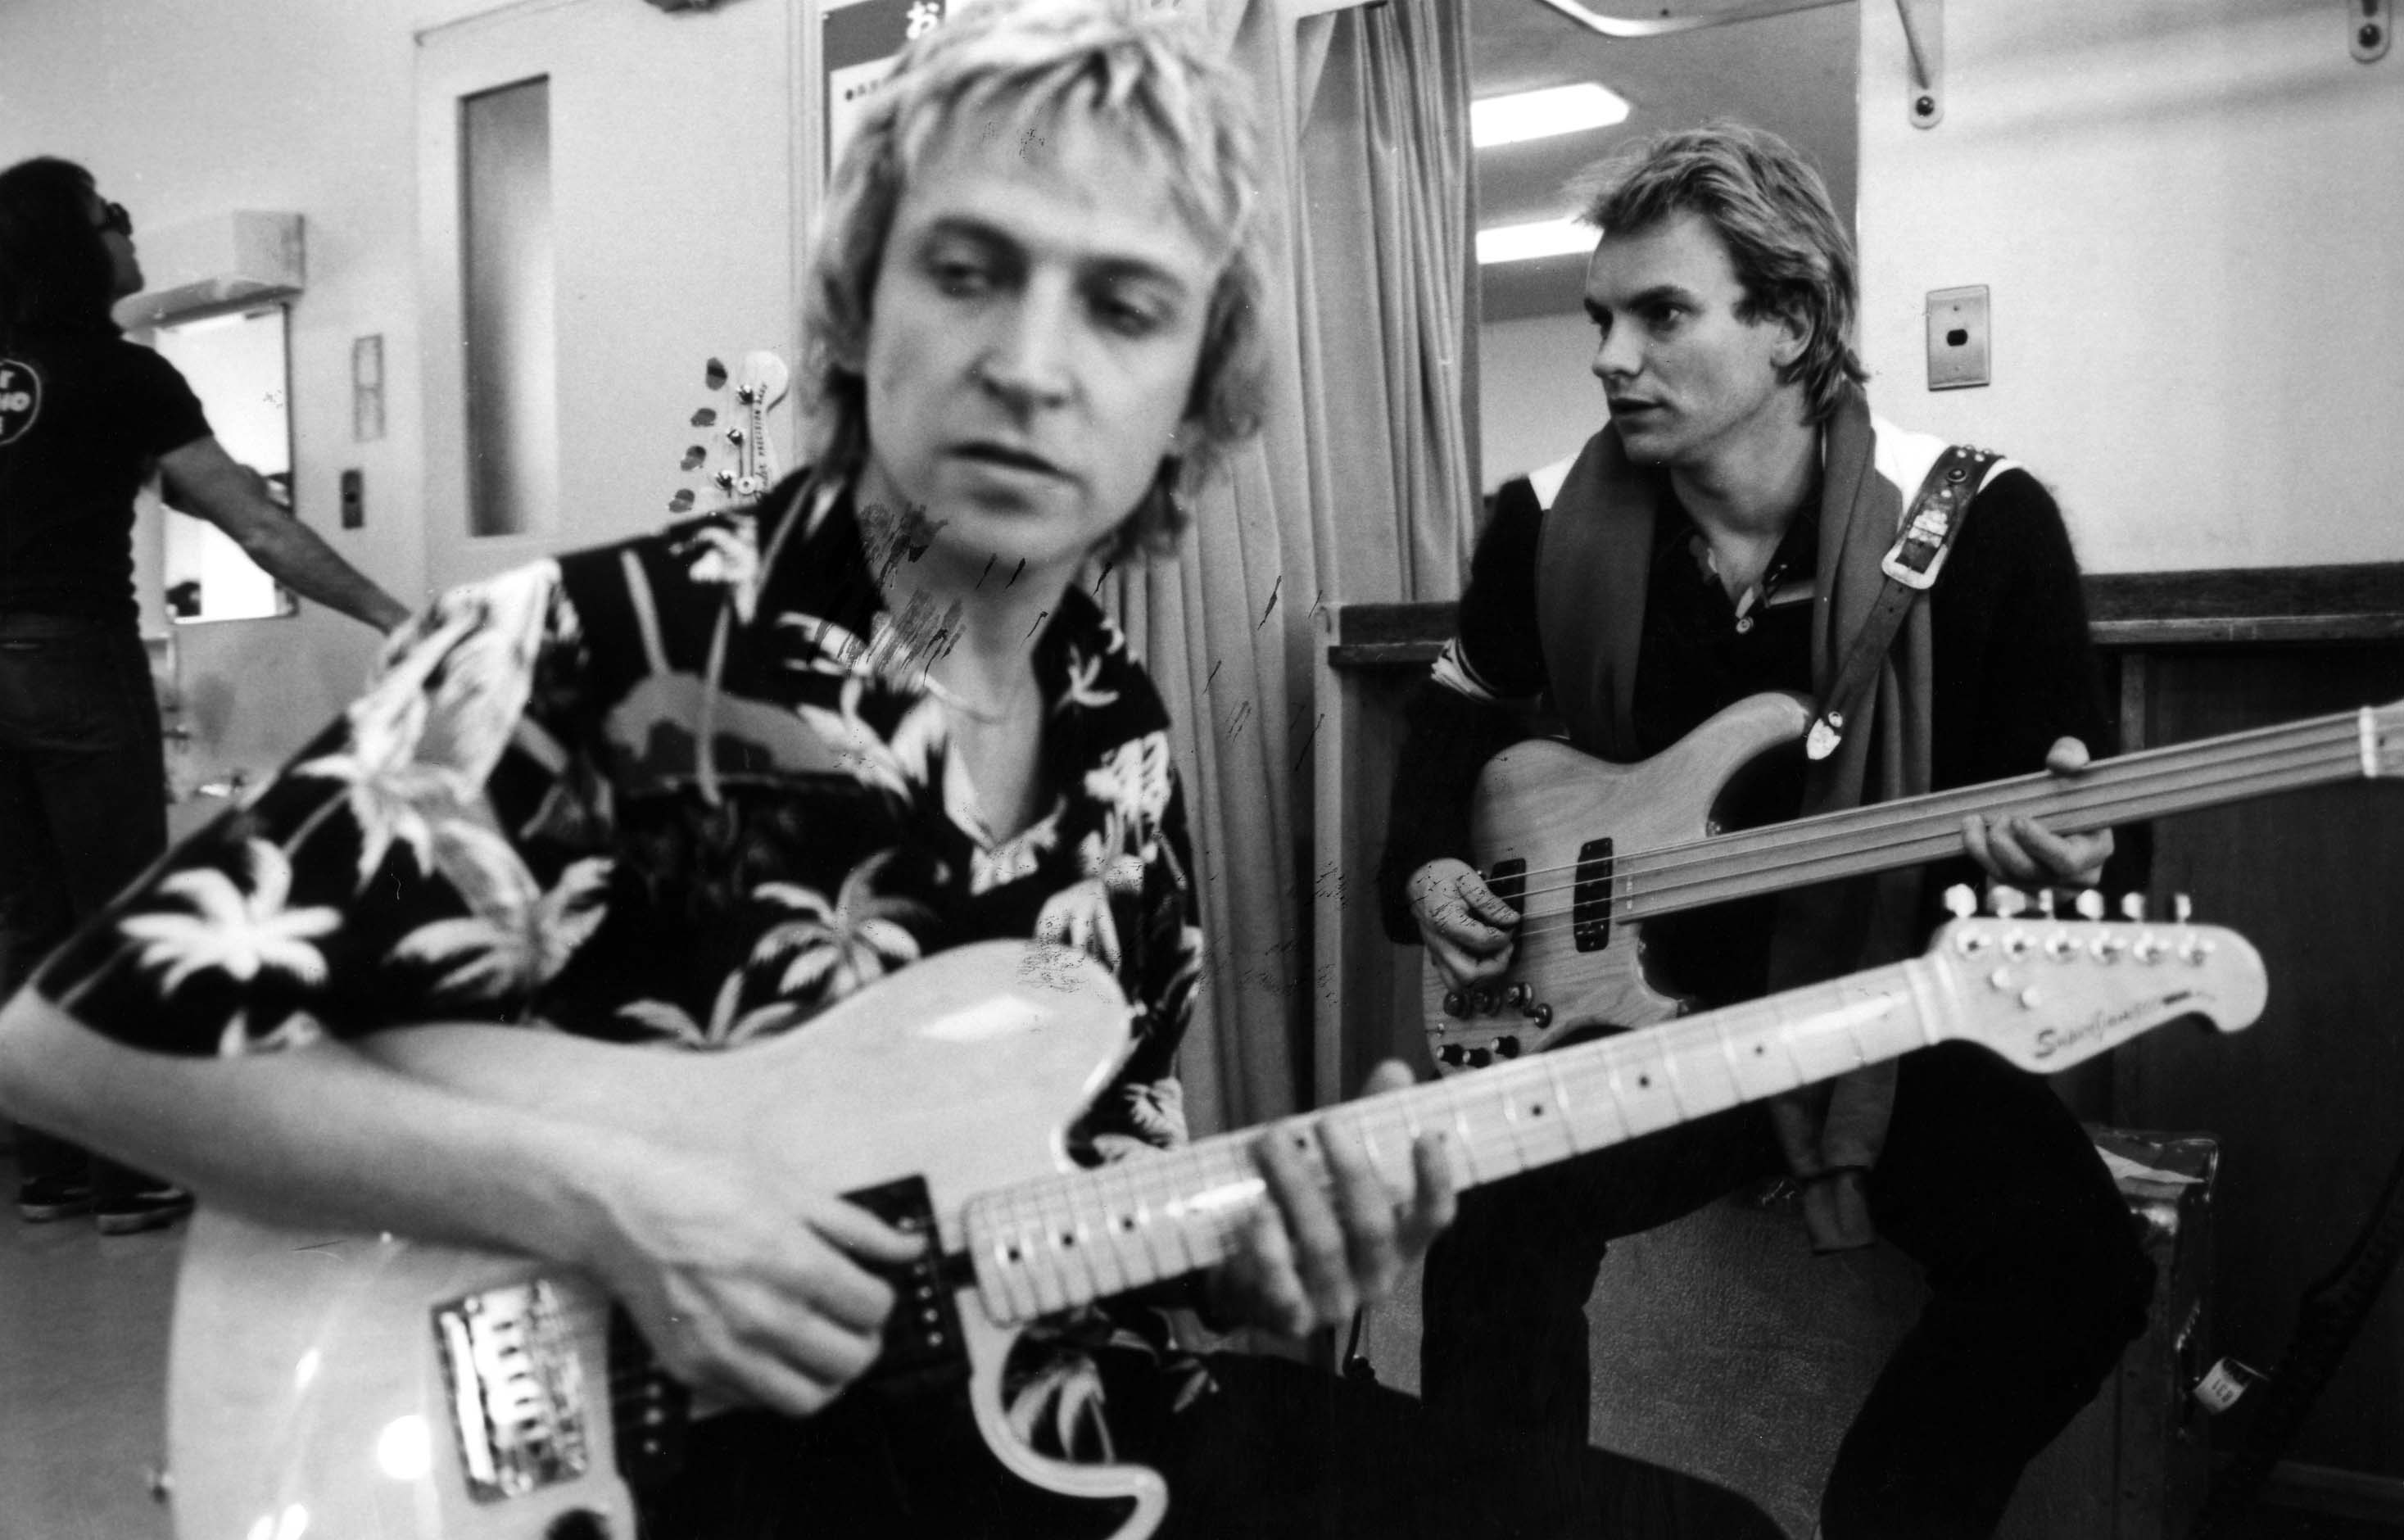 Sting and Andy Summers in Can't Stand Losing You (2012)